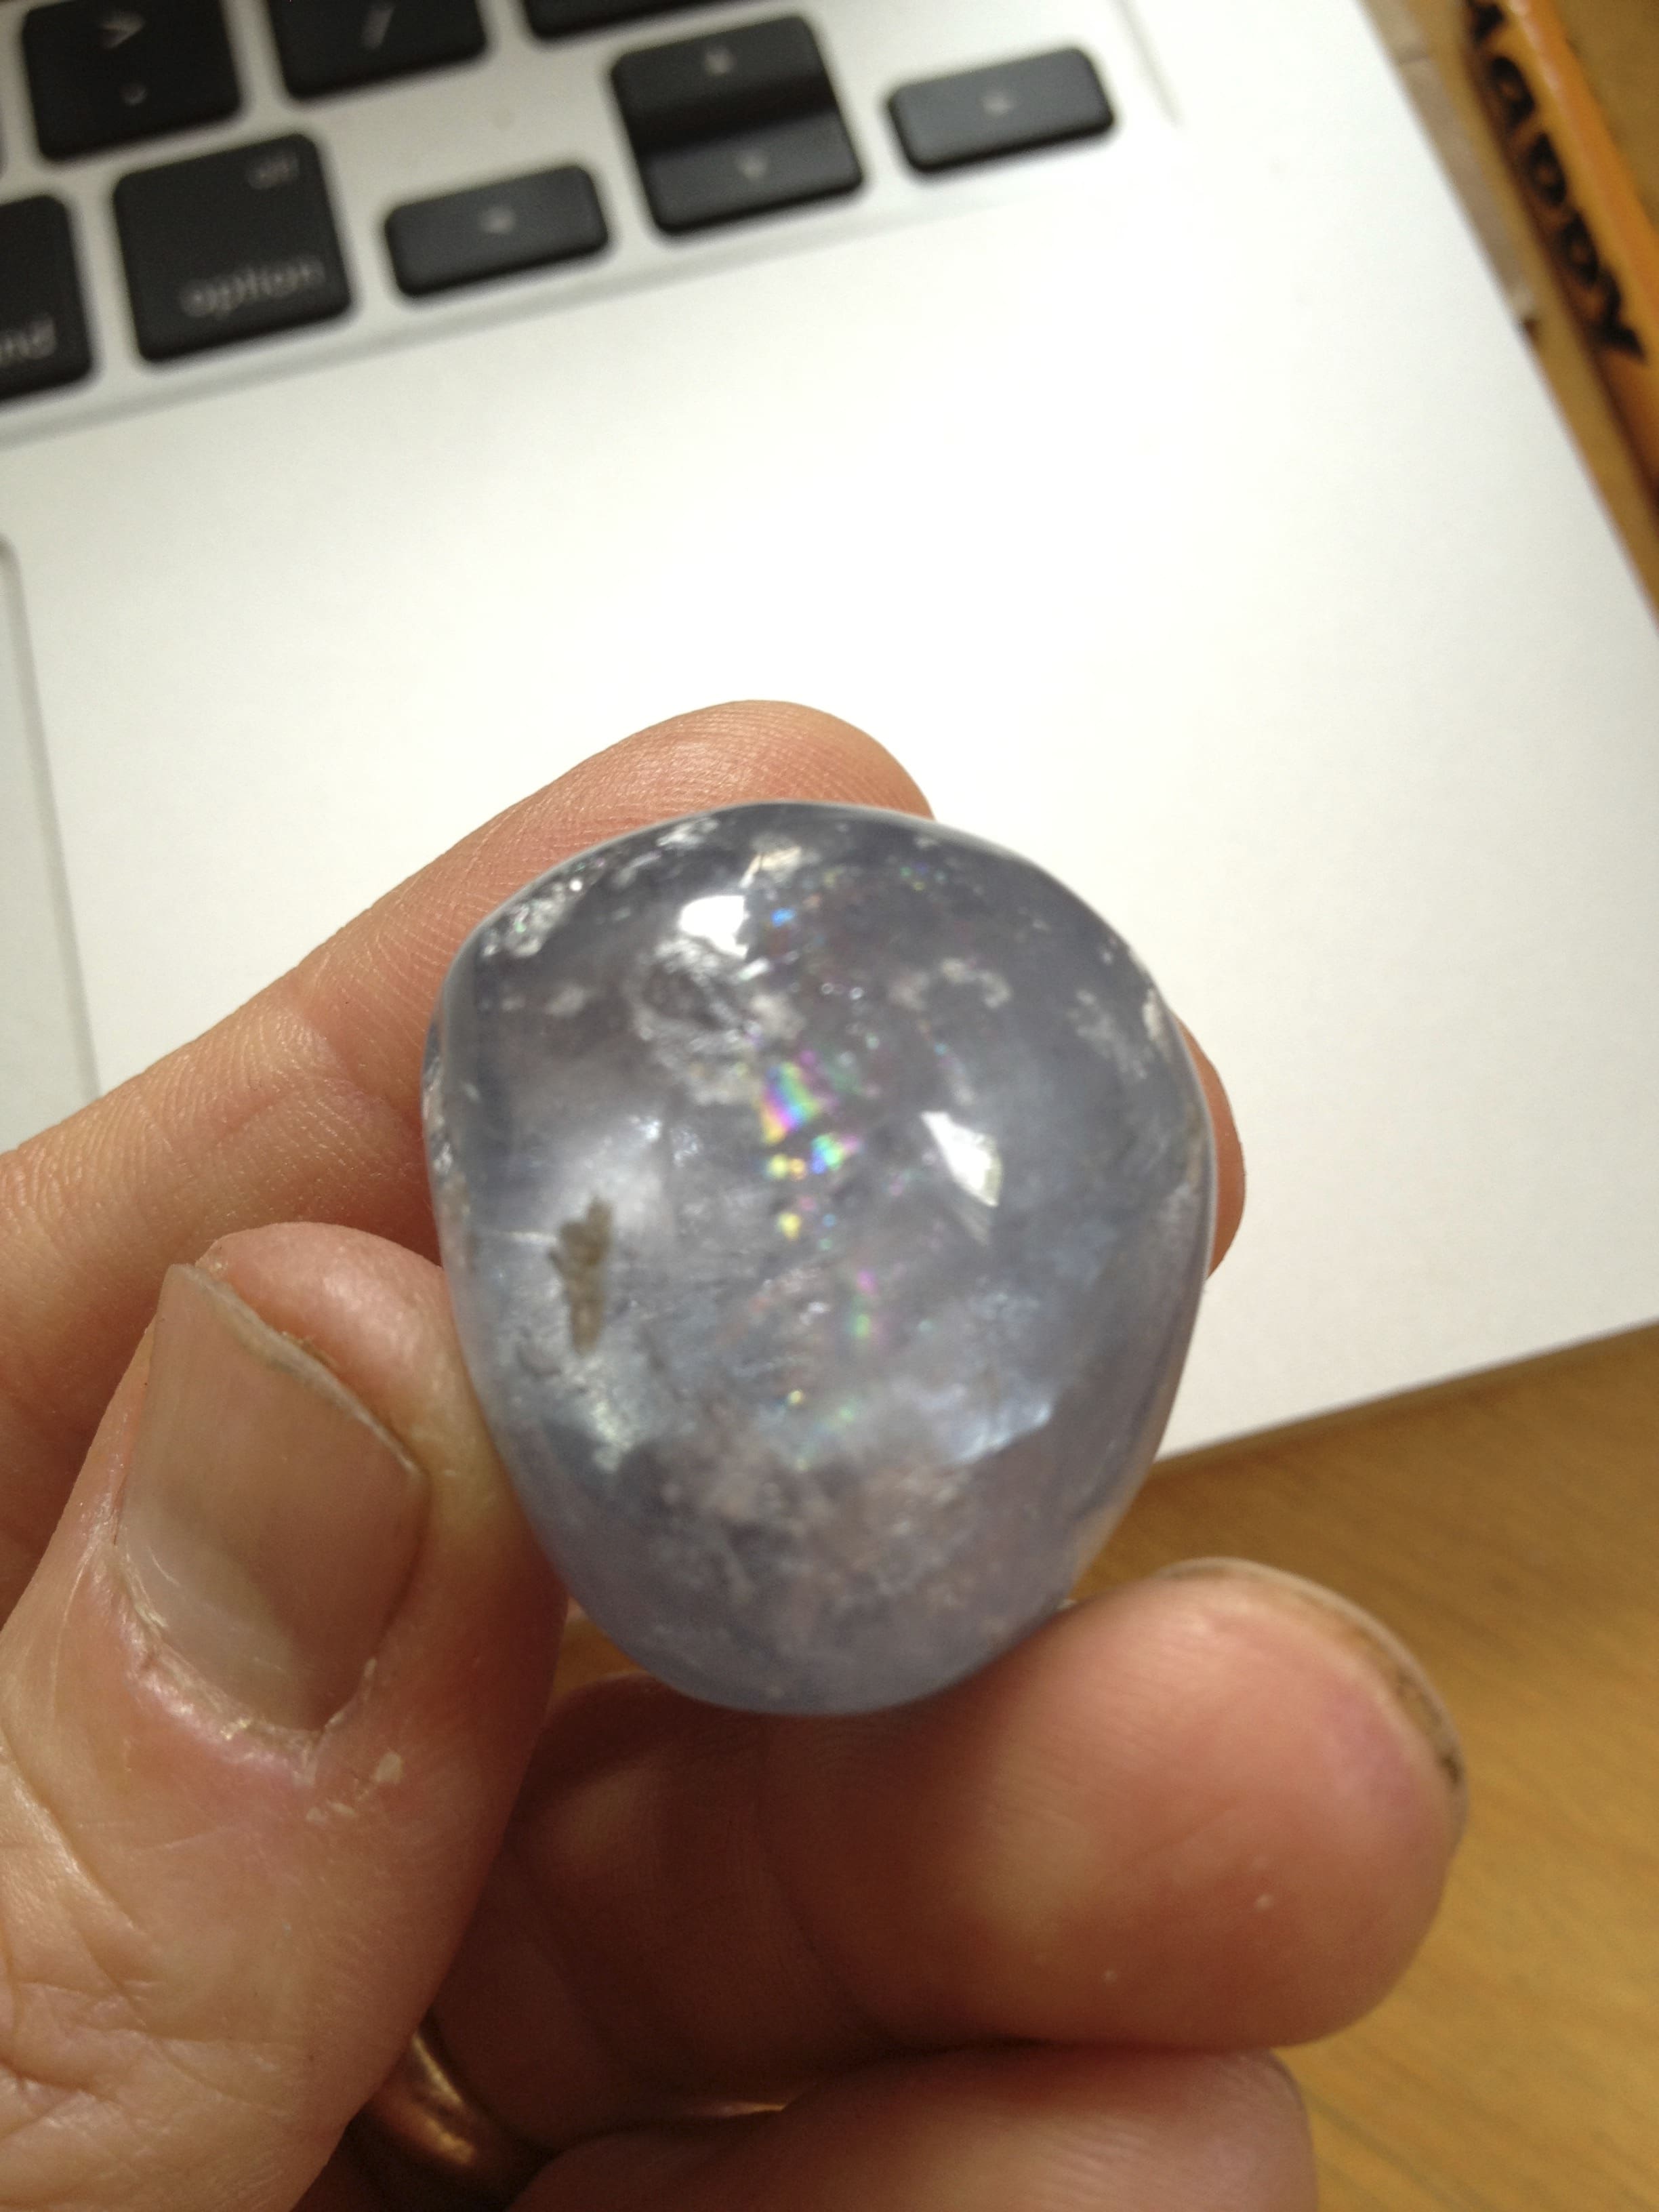 it's just a $3 tumbler - right(?) - wrong: it's a hand polished Celestite, worth a lot more